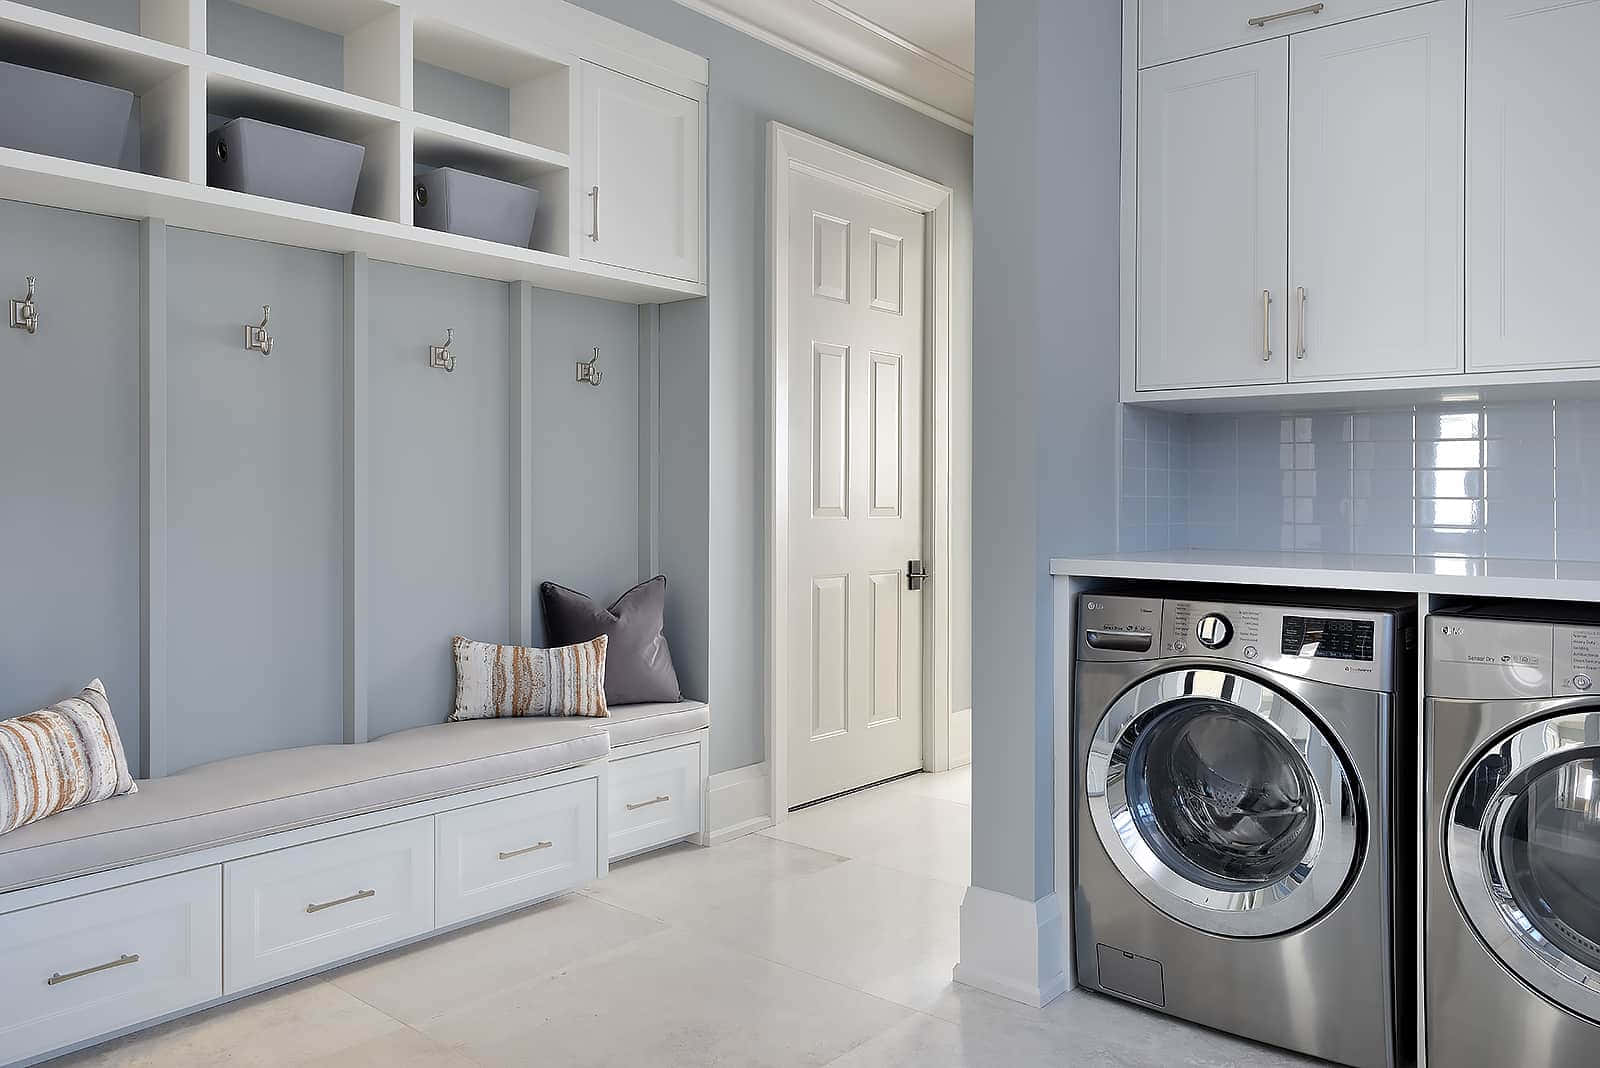 A Laundry Room With Washer And Dryer And Storage